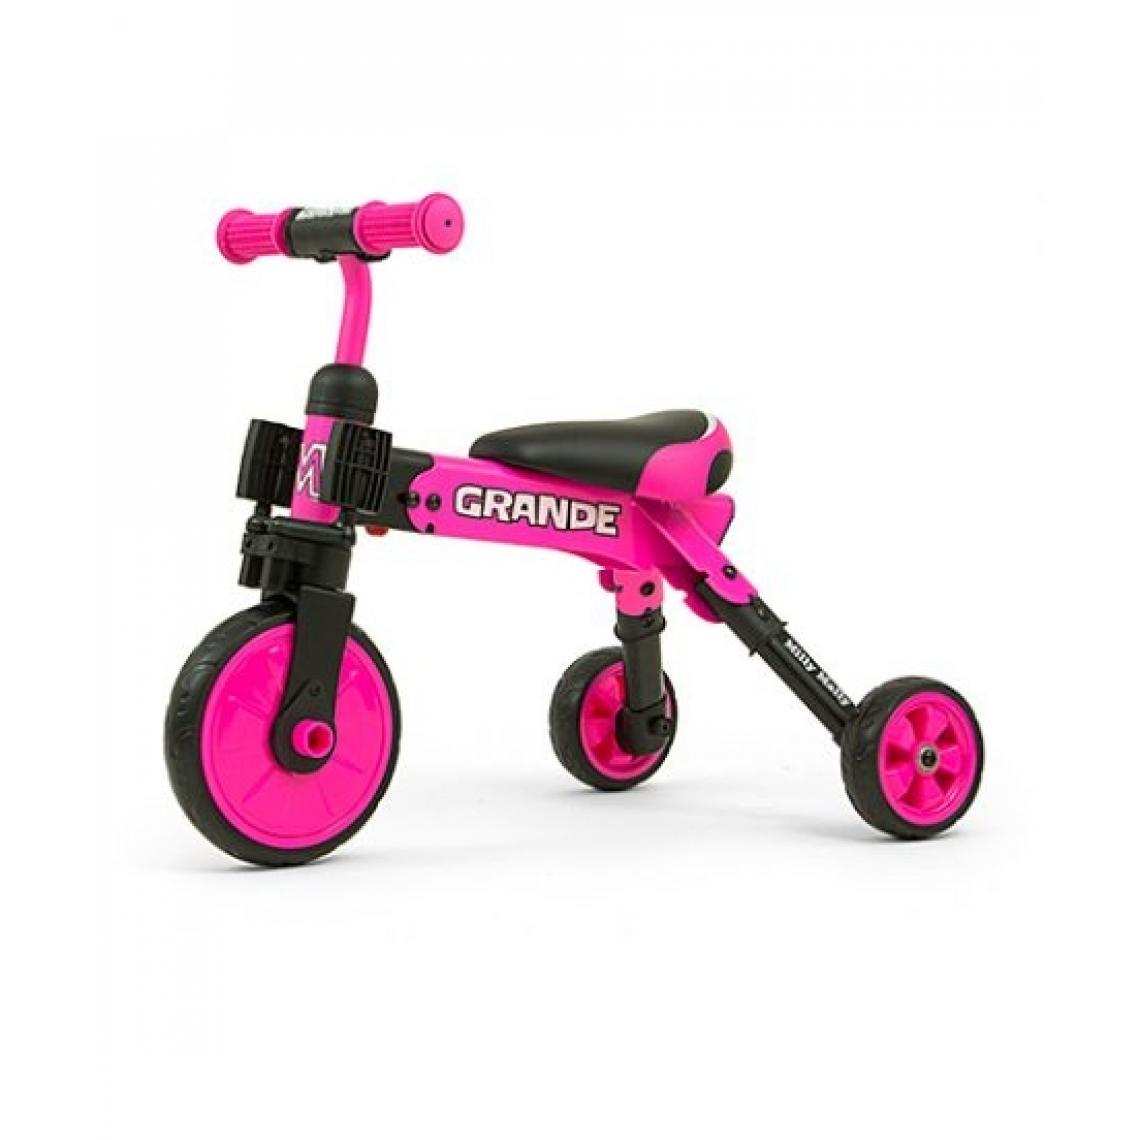 Milly Mally - Ride On - Vélo 2en1 Grande Rose - Tricycle